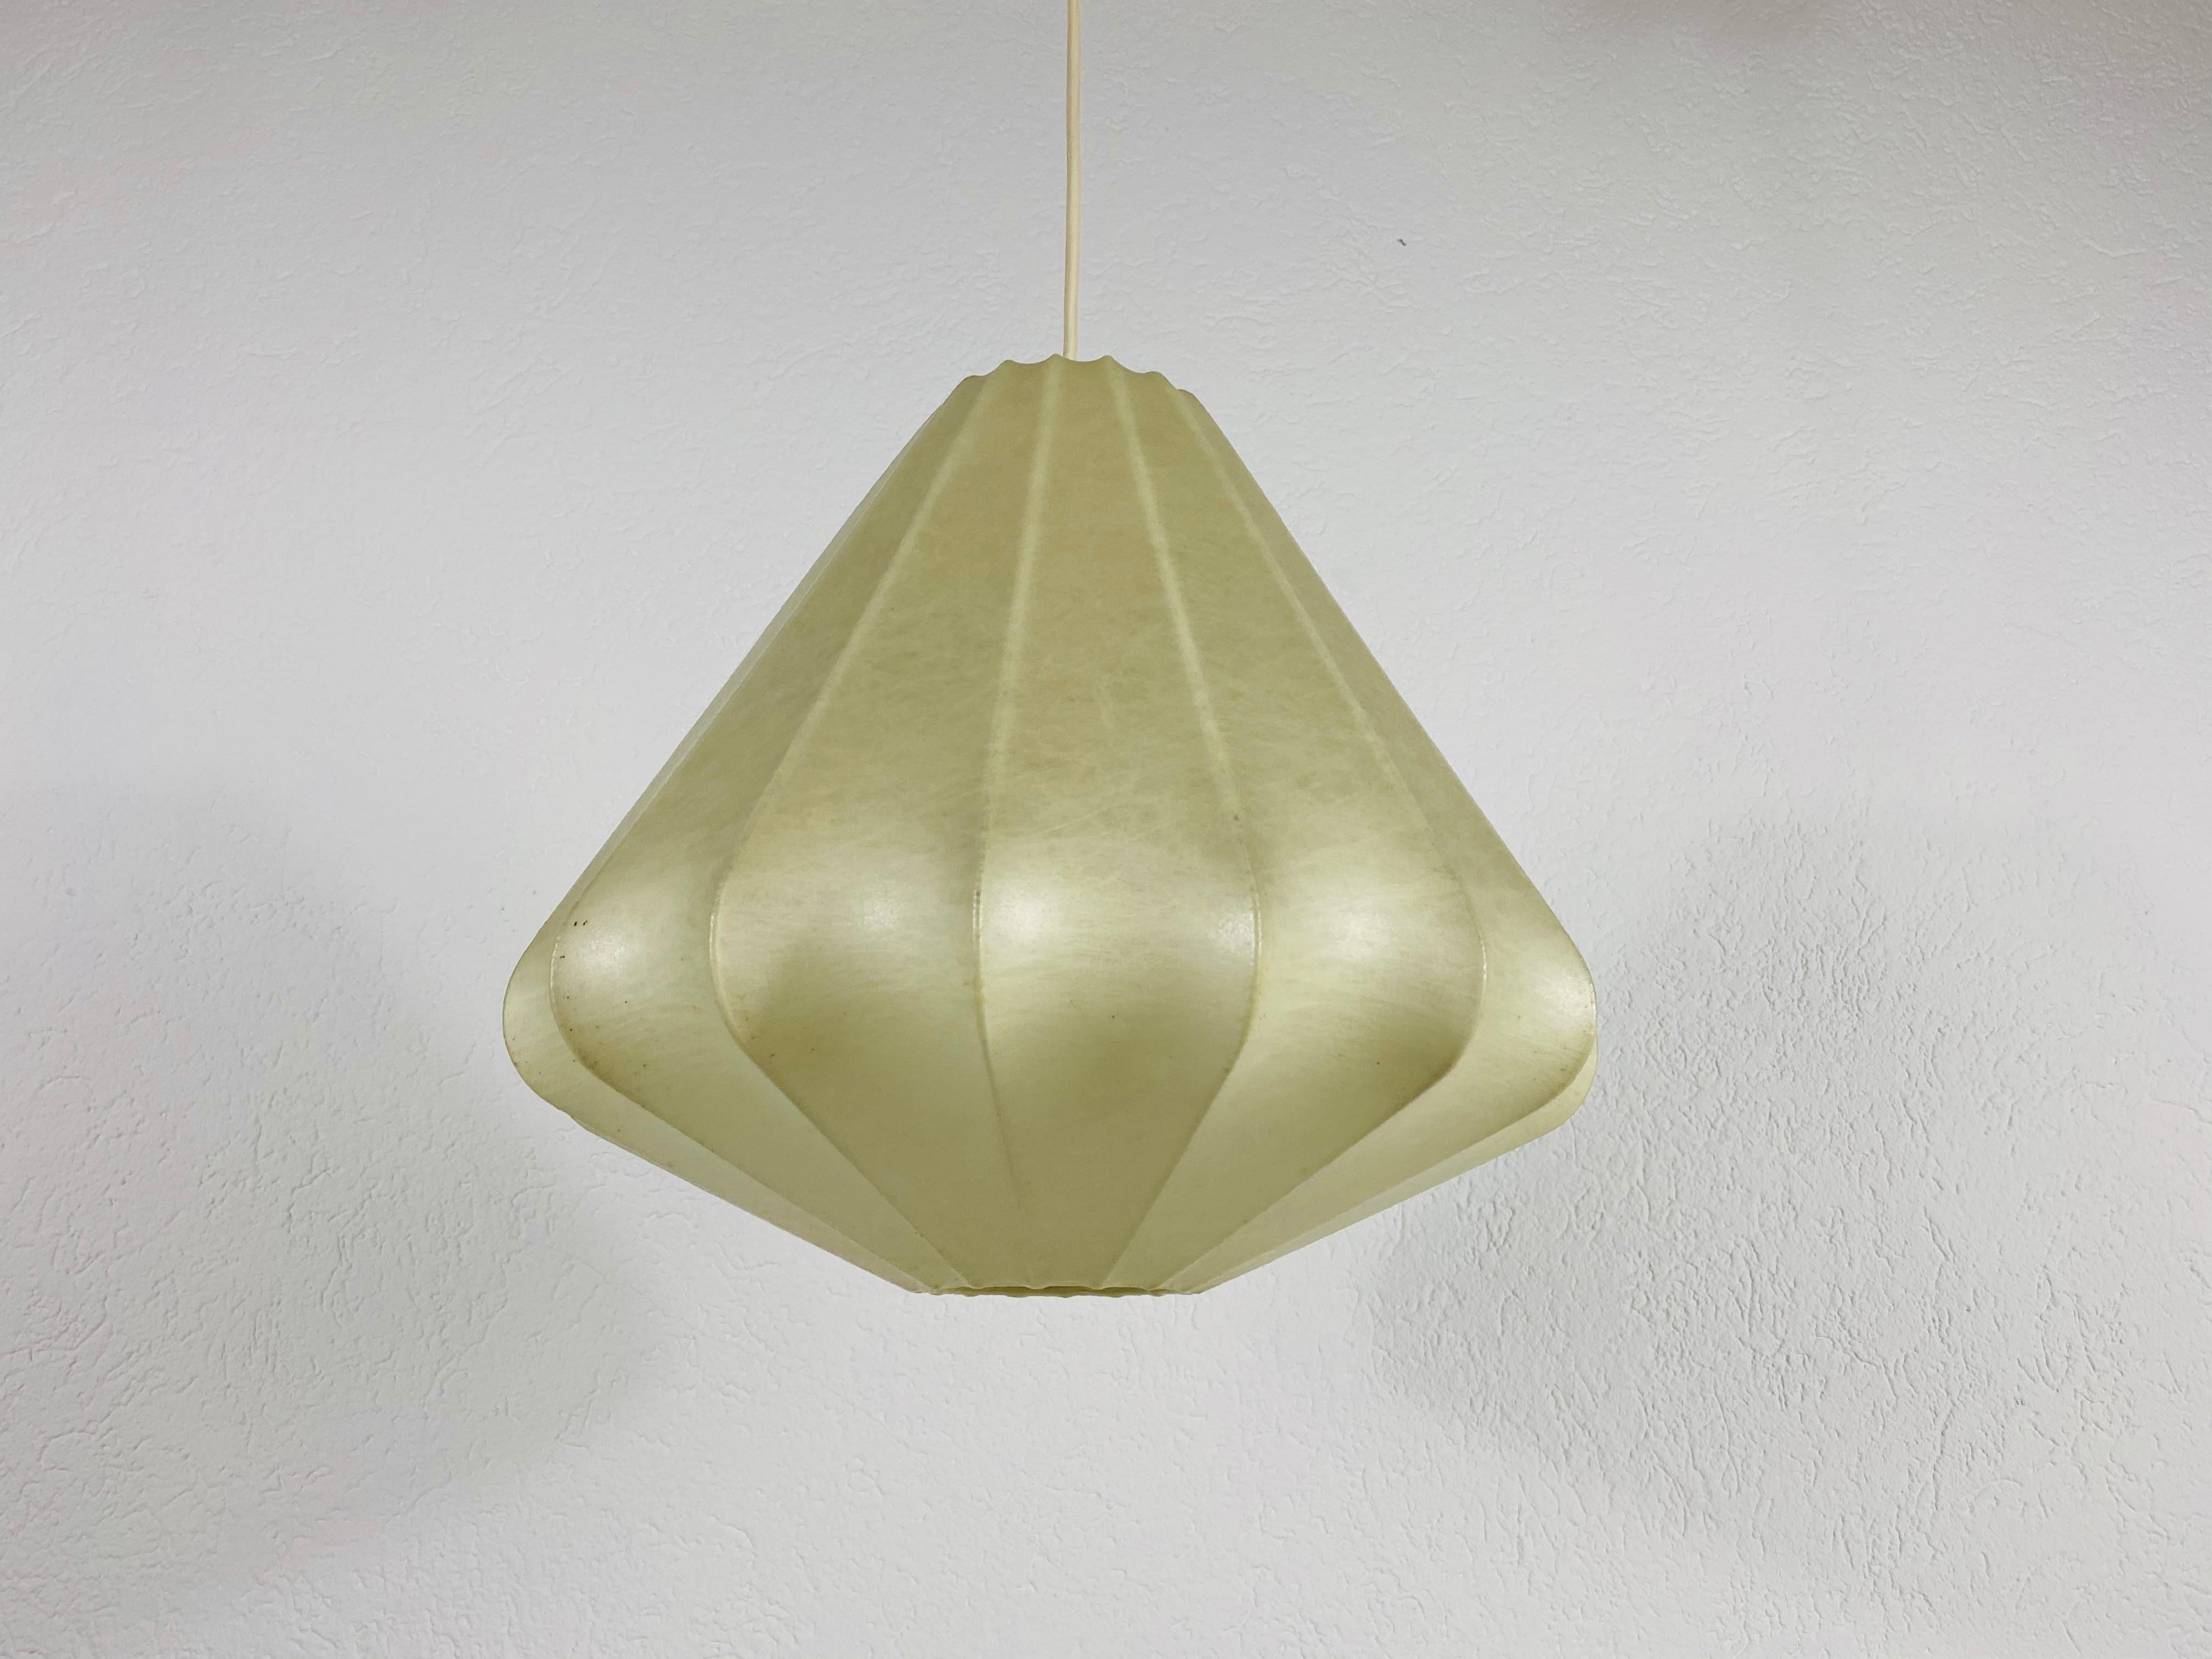 A cocoon pendant lamp made in Italy in the 1960s. The hanging lamp has been designed by Achille Castiglioni. The lamp shade is of original resin and has a losange shape.

Measures: Height 31-80 cm 
Diameter 34 cm

The light requires one E27